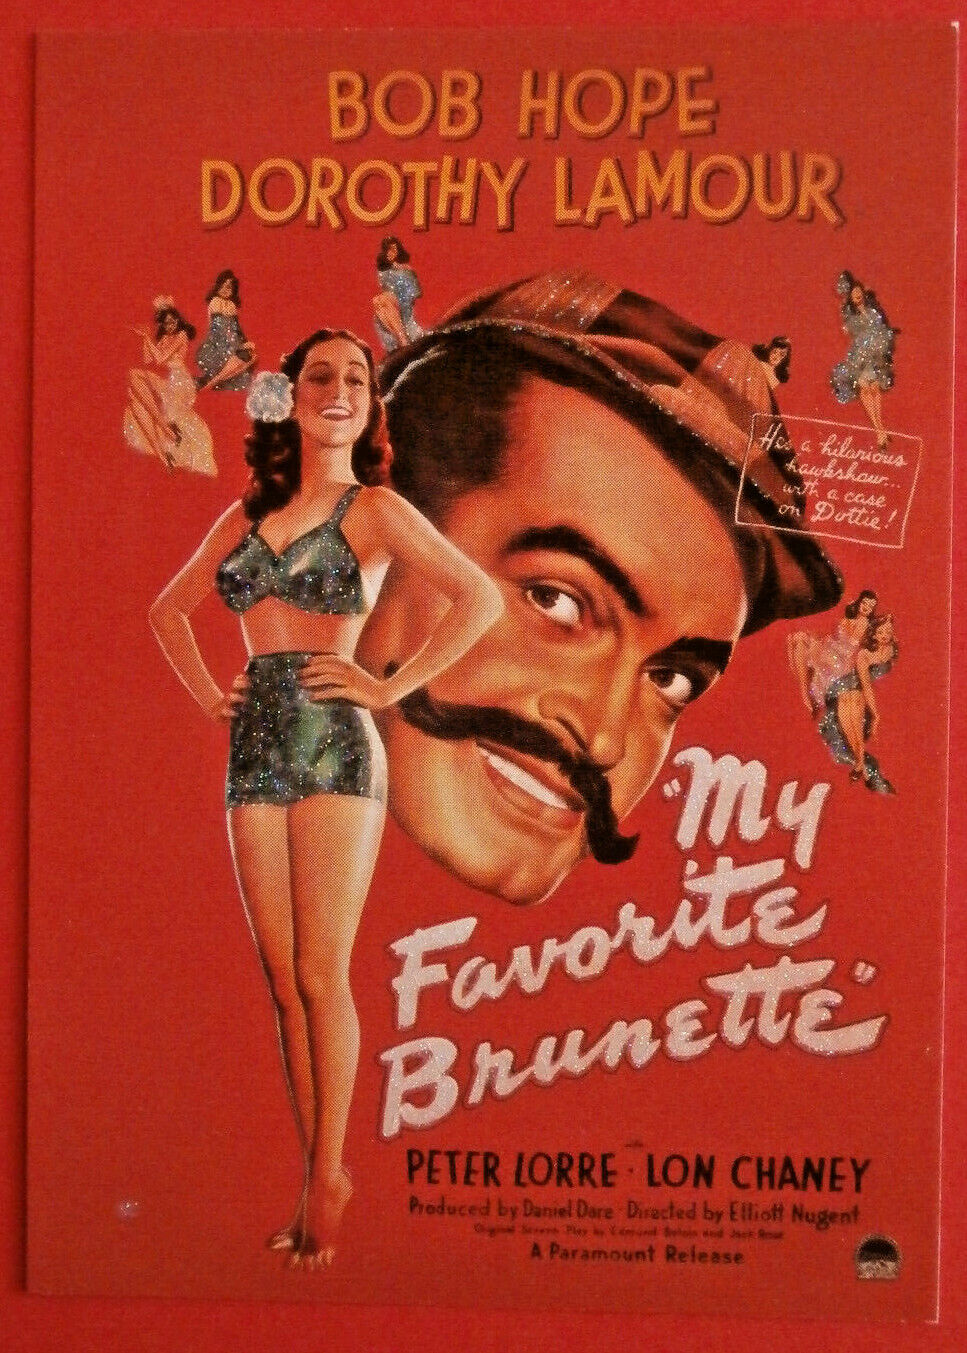 Movie Posters - Card #36 - Bob Hope, Lamour - My Favourite Brunette (1947)